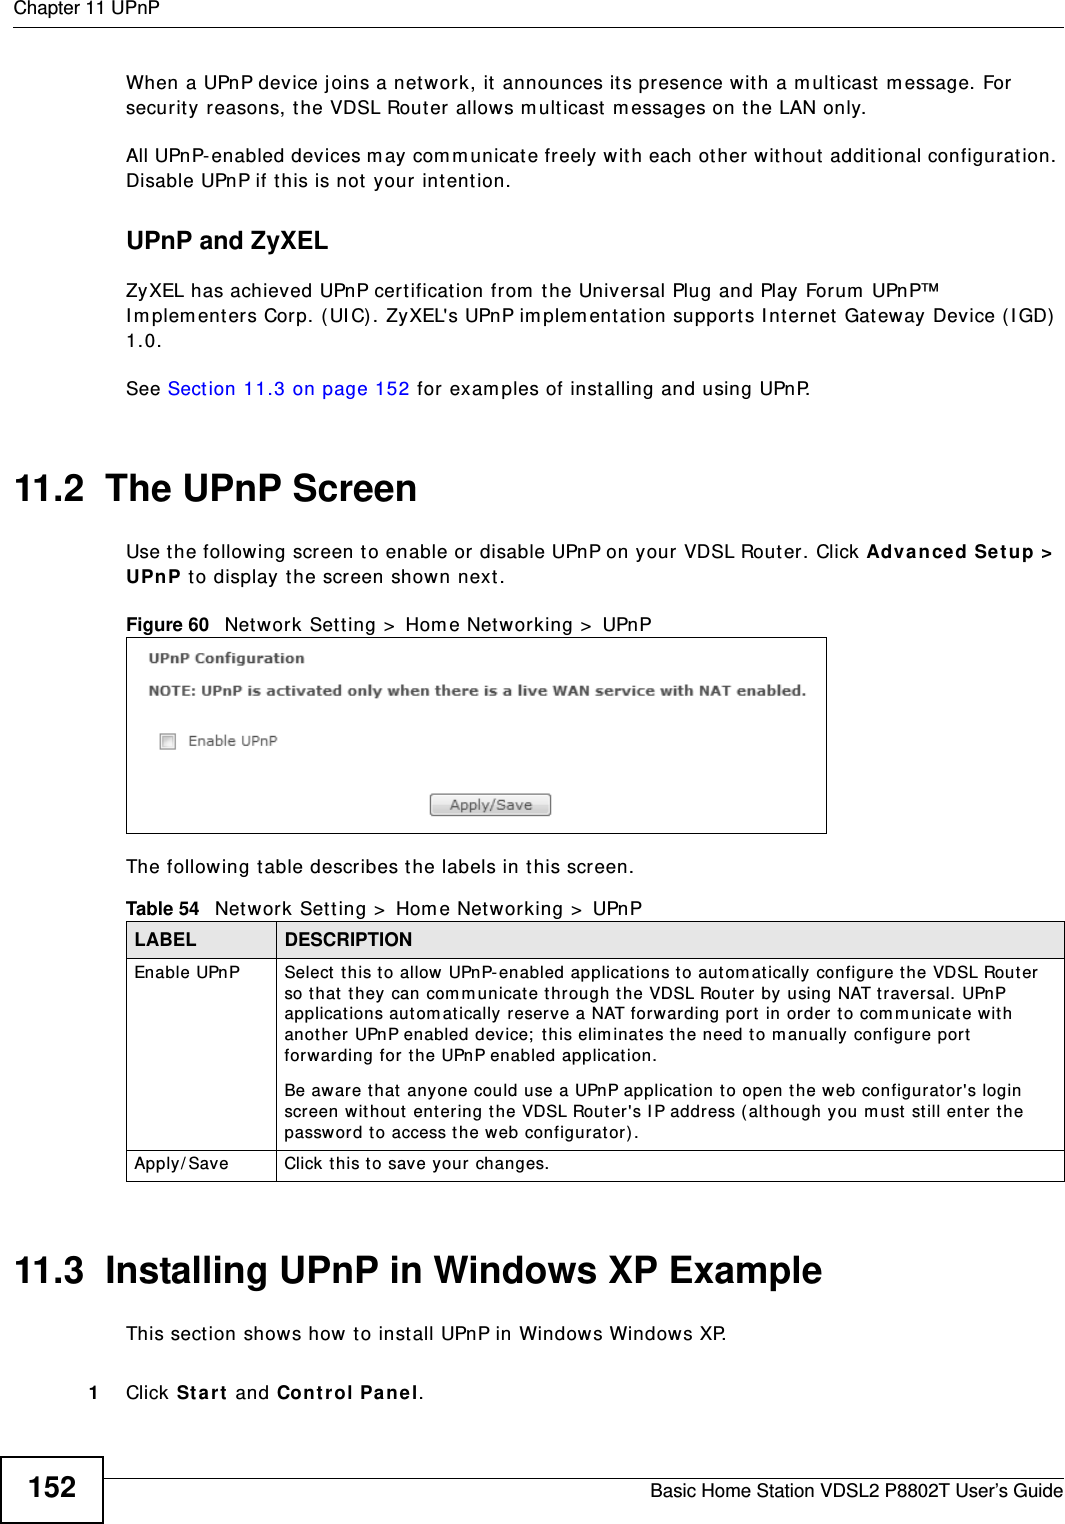 Chapter 11 UPnPBasic Home Station VDSL2 P8802T User’s Guide152When a UPnP device j oins a net work, it announces it s presence with a m ulticast  m essage. For security reasons, t he VDSL Router allows m ulticast  m essages on t he LAN only.All UPnP- enabled devices m ay com m unicat e freely with each ot her wit hout  additional configuration. Disable UPnP if t his is not your int ent ion. UPnP and ZyXELZyXEL has achieved UPnP certification from  the Universal Plug and Play Forum  UPnP™ I m plem ent ers Corp. ( UI C) . ZyXEL&apos;s UPnP im plem ent at ion support s I nt ernet Gateway Device ( I GD)  1.0. See Sect ion 11.3 on page 152 for exam ples of installing and using UPnP.11.2  The UPnP ScreenUse t he following screen t o enable or disable UPnP on your VDSL Router. Click Advanced Setup &gt;  UPnP t o display the screen show n next .Figure 60   Net work Set ting &gt;  Hom e Net working &gt;  UPnPThe following t able describes t he labels in t his screen.11.3  Installing UPnP in Windows XP ExampleThis sect ion shows how to install UPnP in Window s Windows XP. 1Click St a r t  and Cont r ol Pa ne l. Table 54   Net work Set t ing &gt;  Home Net working &gt;  UPnPLABEL DESCRIPTIONEnable UPnP Select  t his to allow UPnP- enabled applications to aut om at ically configure the VDSL Rout er so t hat  t hey can com m unicate t hrough t he VDSL Rout er by using NAT traver sal. UPnP applications aut om at ically  reserve a NAT forwarding port in order t o comm unicat e wit h anot her UPnP enabled dev ice;  t his elim inates the need to m anually  configure port  forwarding for  t he UPnP enabled applicat ion. Be awar e t hat anyone could use a UPnP applicat ion t o open the web configurat or&apos;s login screen without  ent ering the VDSL Router&apos;s I P address ( although you m ust  still ent er the passwor d to access t he web configurator).Apply/ Save Click t his to save your changes.